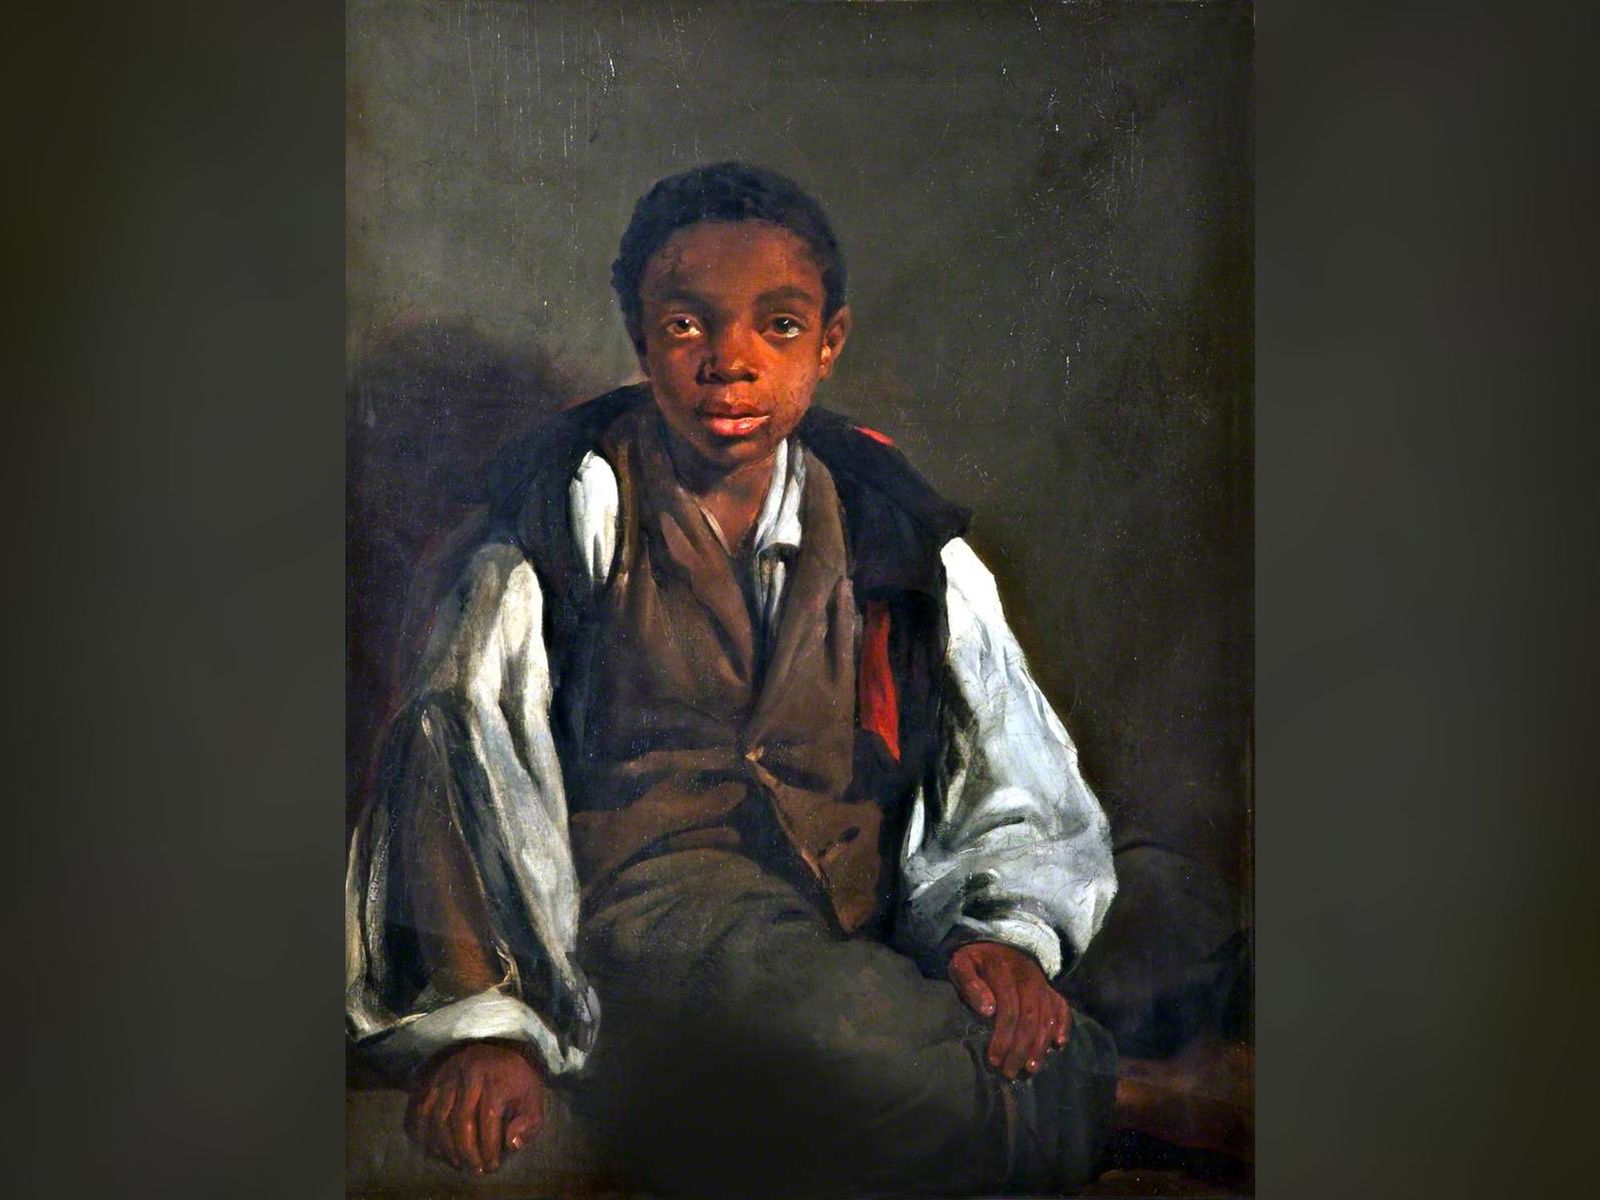 This Museum Needs Your Help Identifying the Subject of a 19th-Century Painting